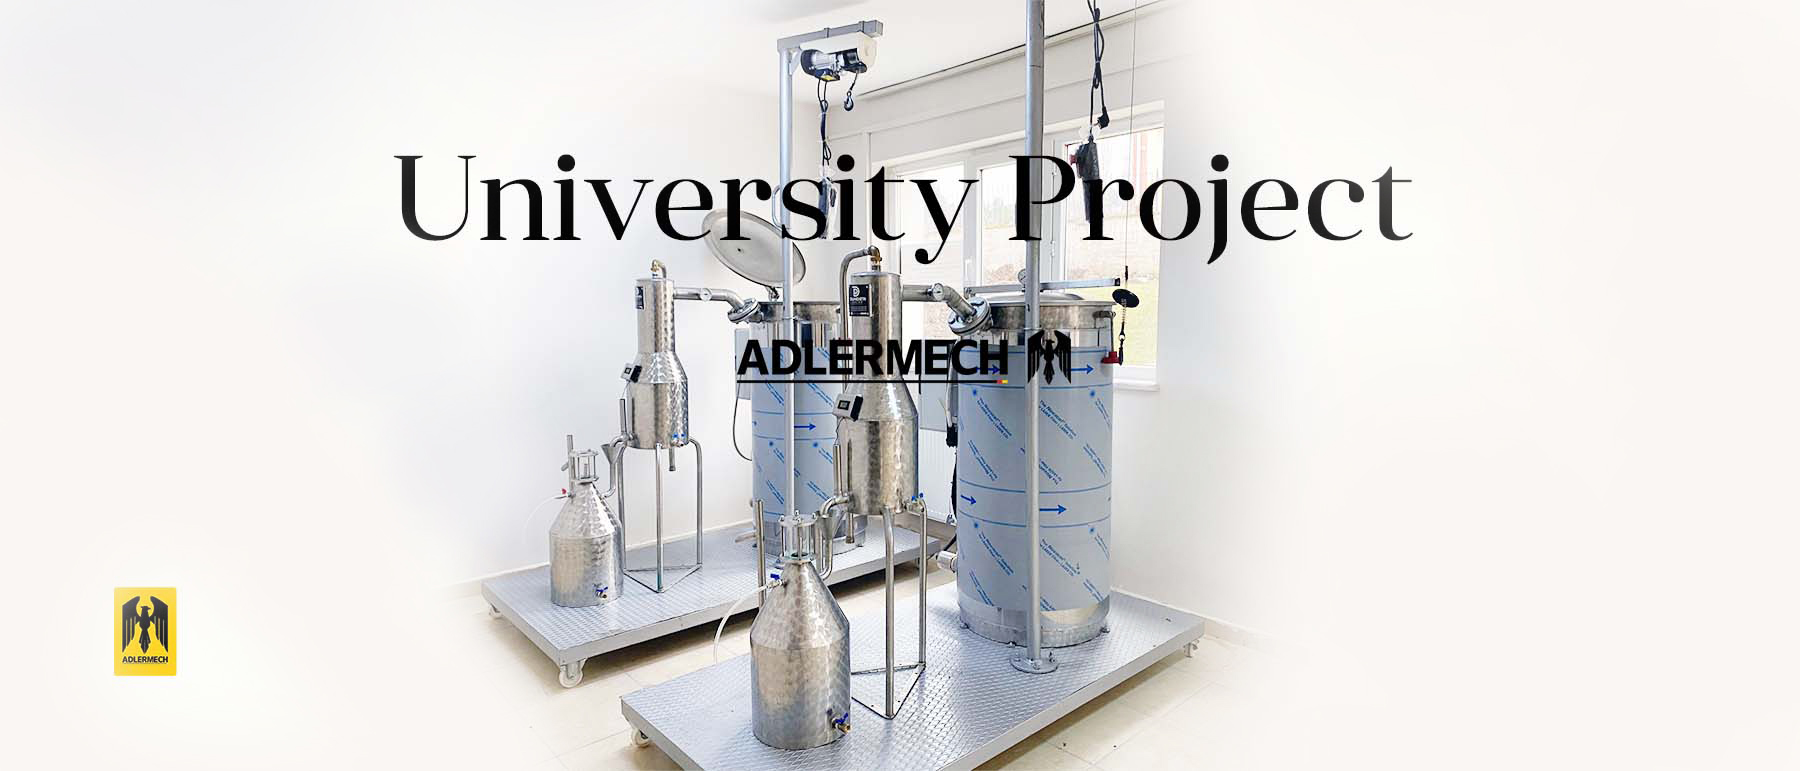 Our Next Laboratory Scale Distillation Equipment Goes to University in Ankara.